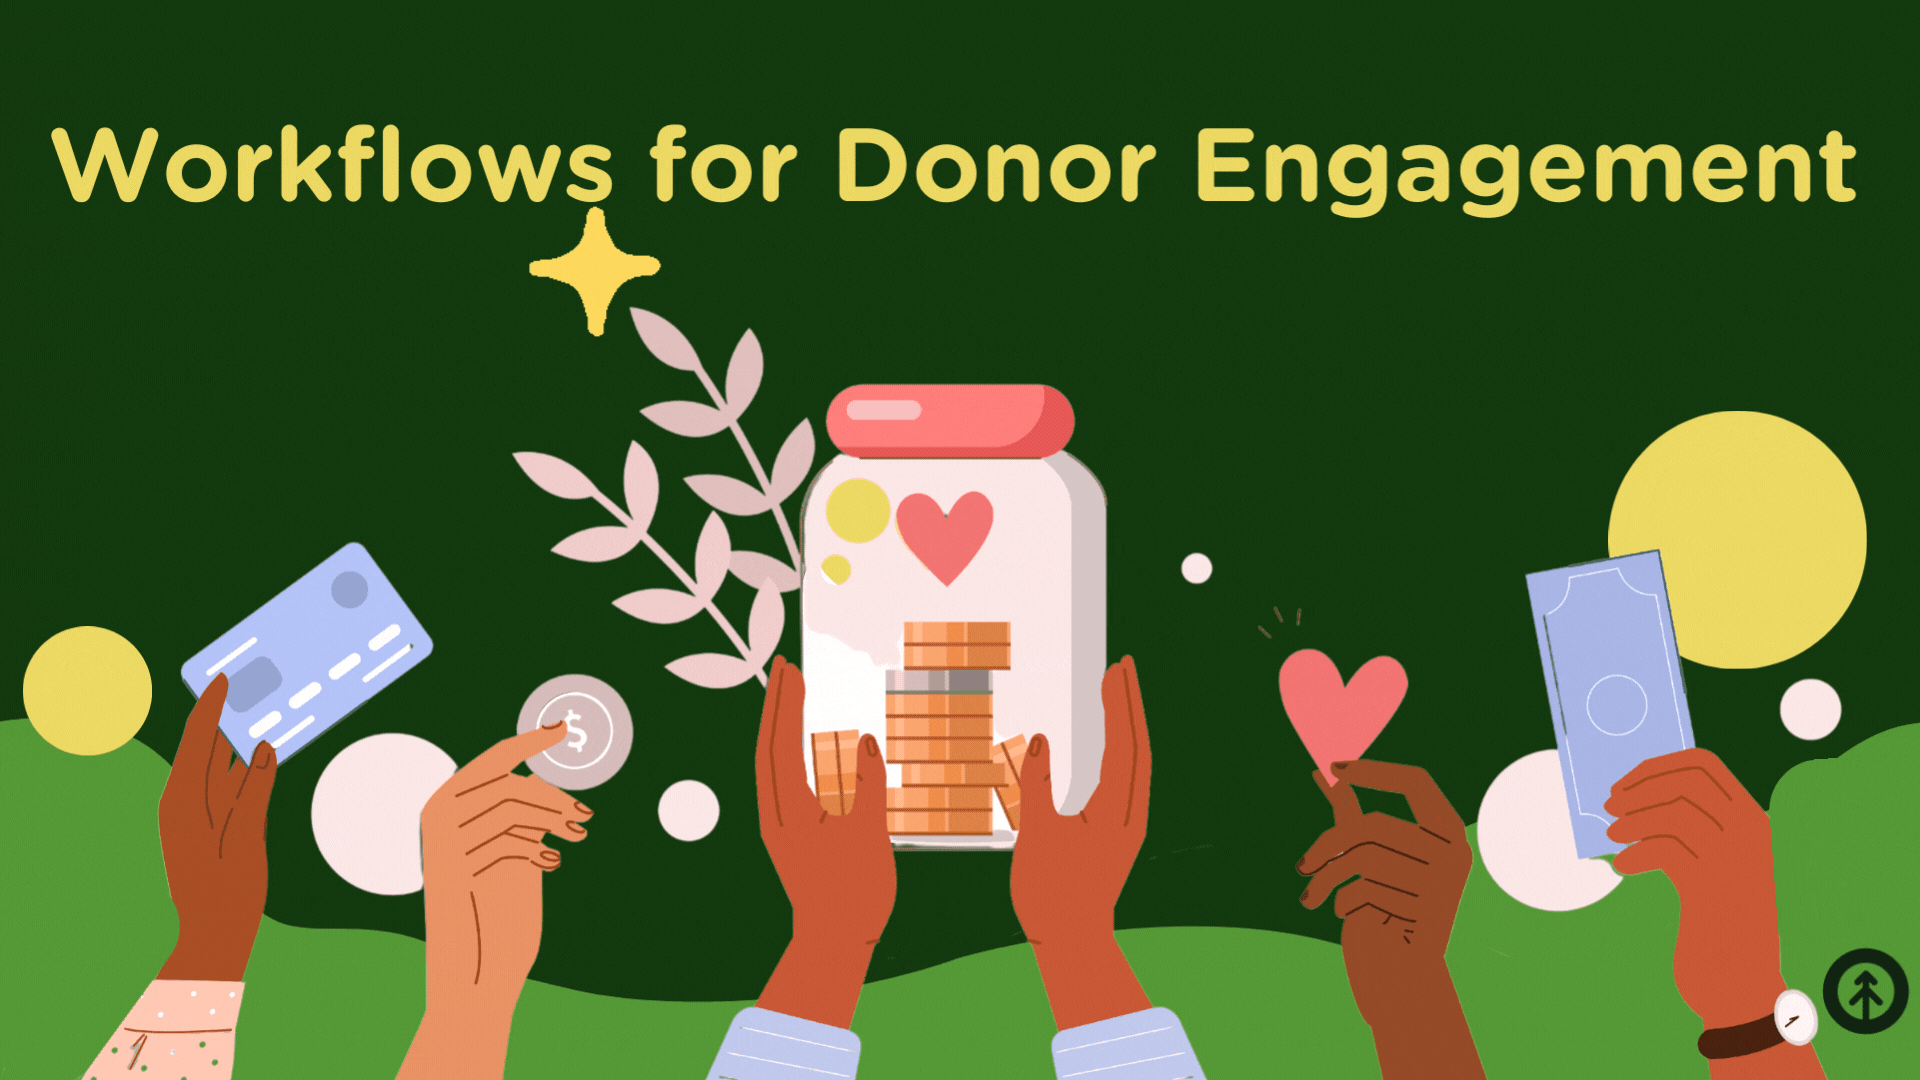 A vector image of people's hands reaching up with hearts, coins, credit cards, and money as representative of giving to a non-profit organization because of donor outreach.